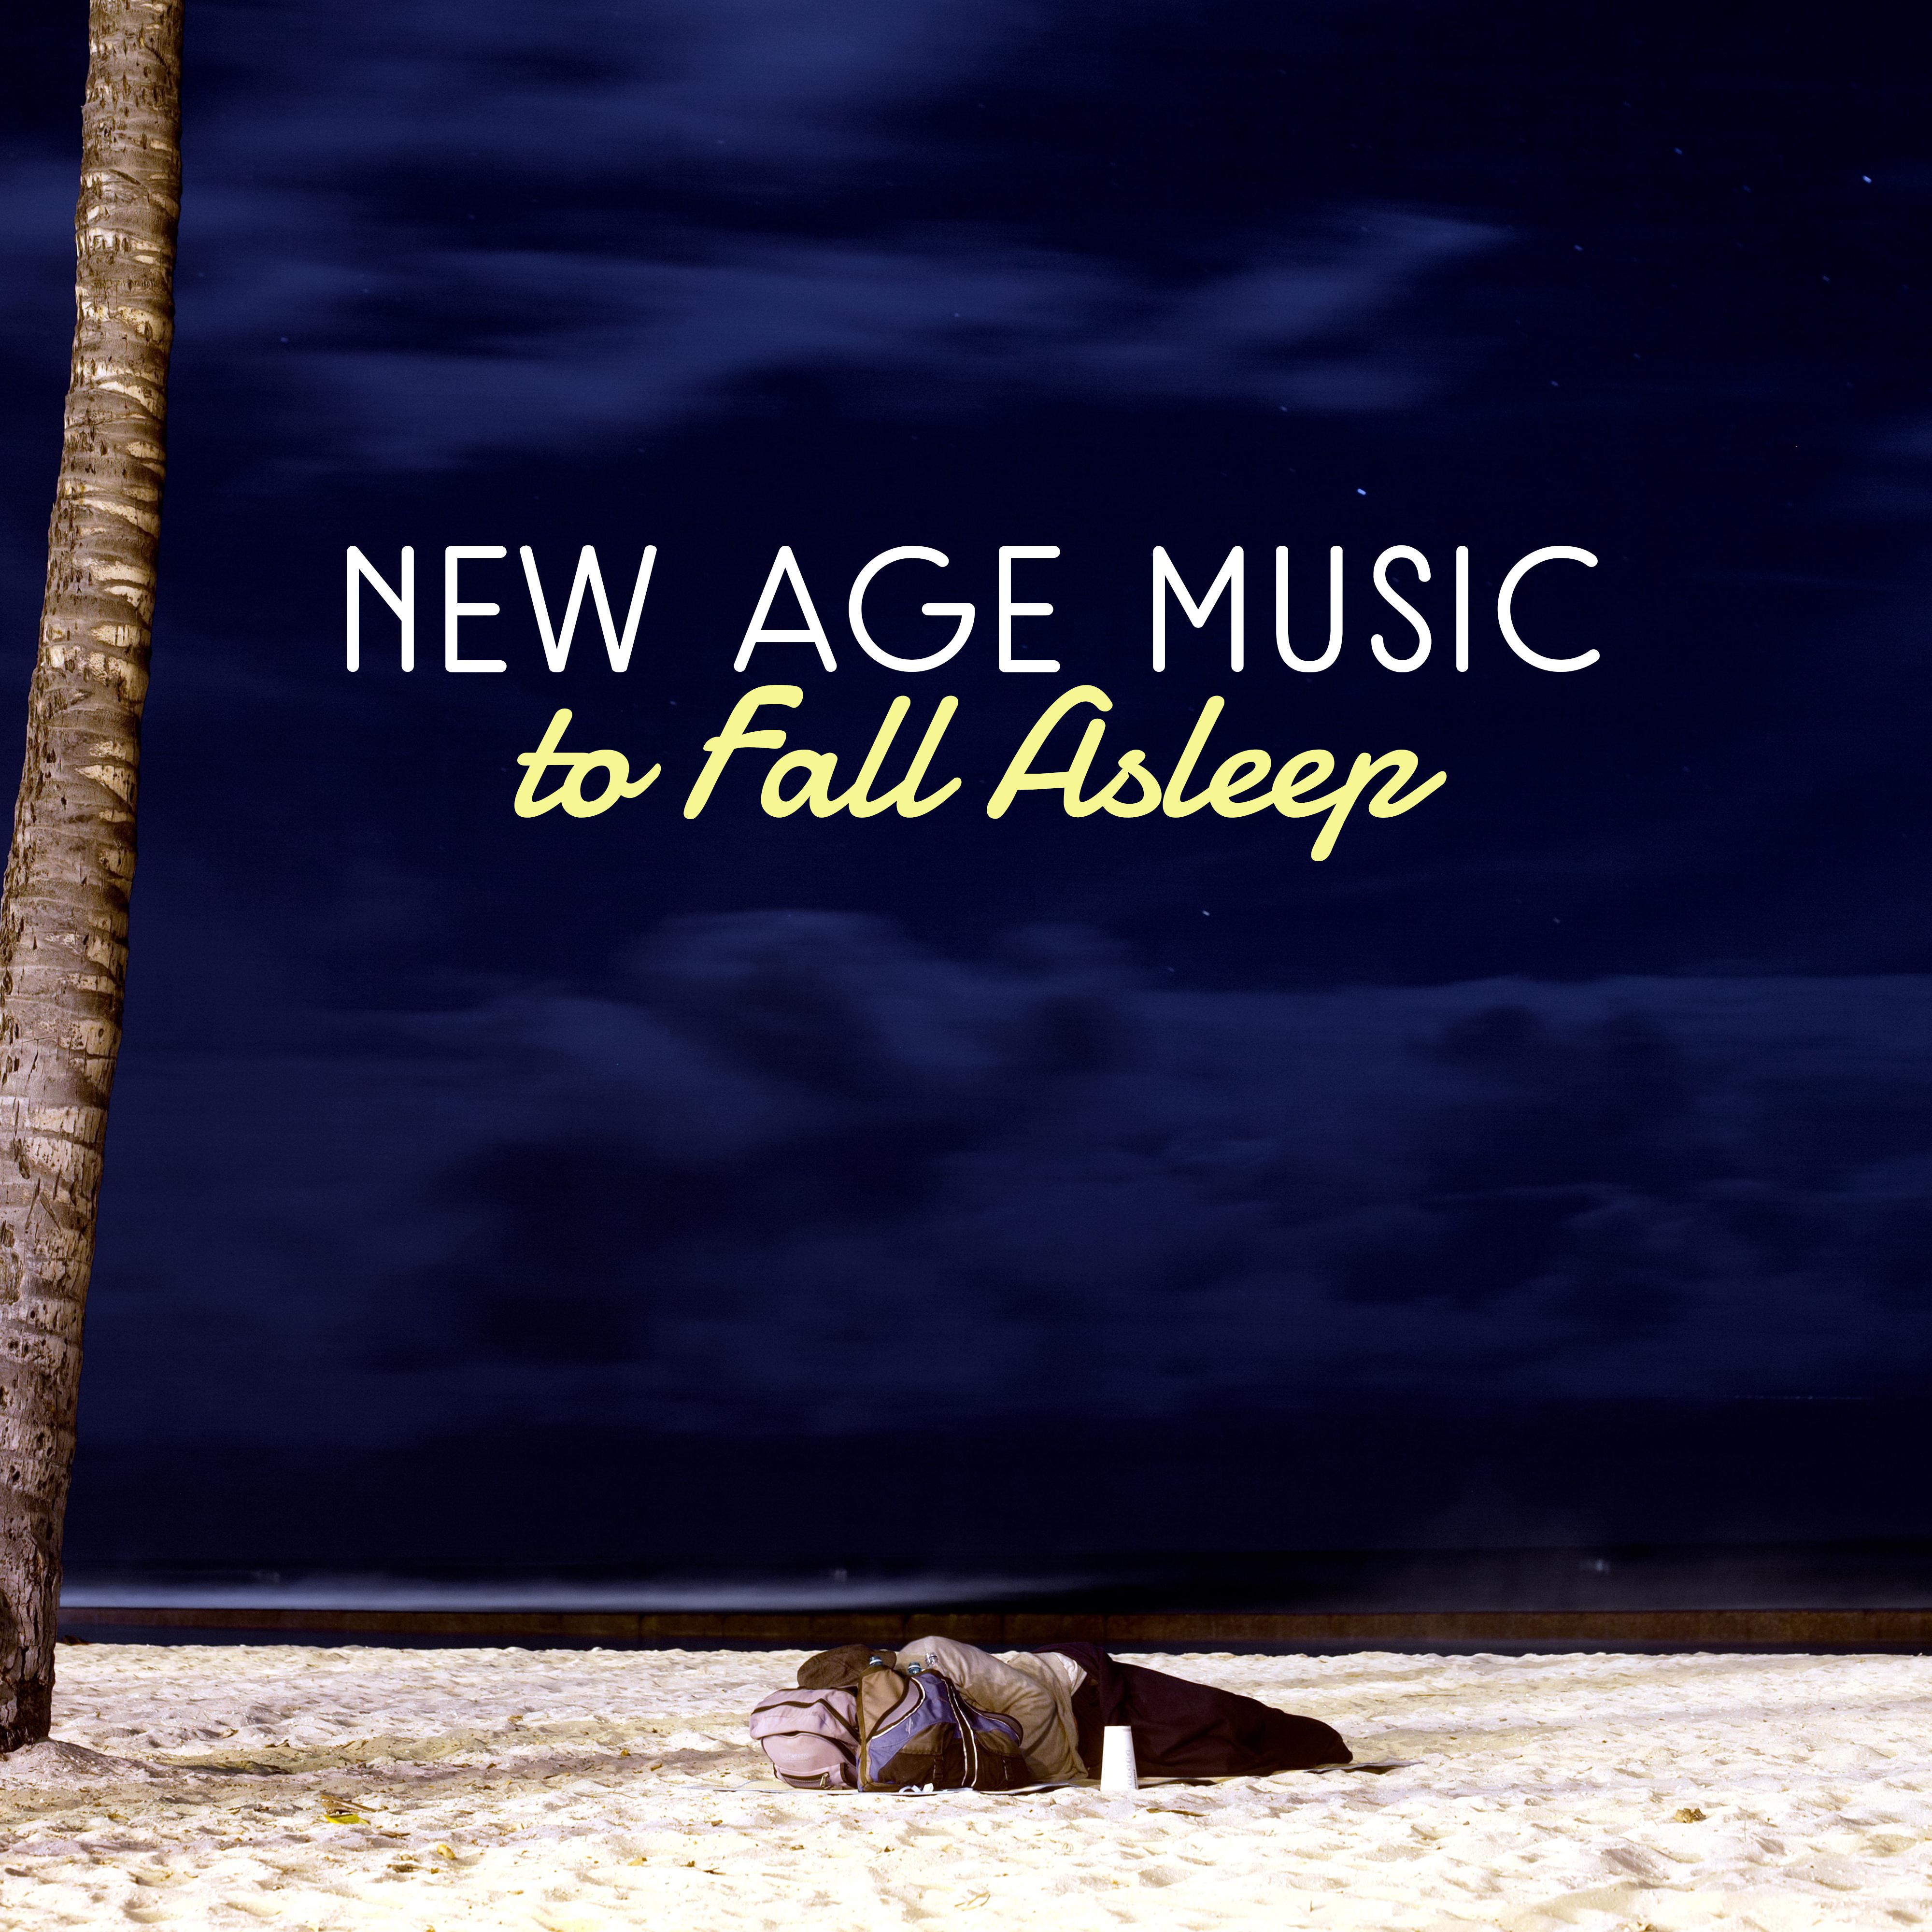 New Age Music to Fall Asleep  Relief Stress with Soft Sounds, Sleep  Relax, Inner Calmness